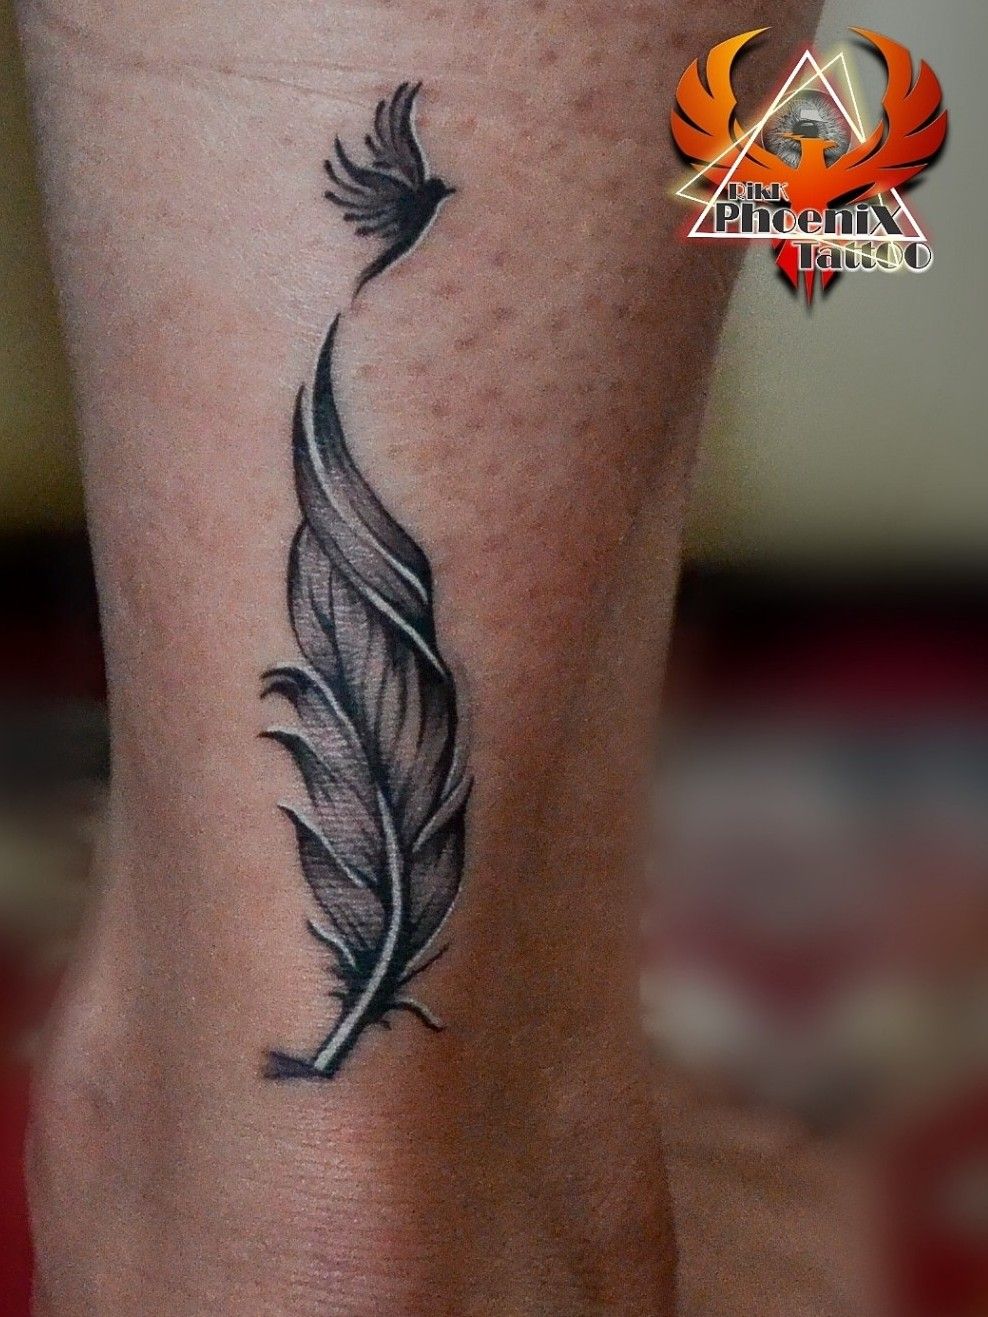 25 Gorgeous Phoenix Tattoo Designs You Must Love And Try  Women Fashion  Lifestyle Blog Shinecococom  Phoenix tattoo design Tribal phoenix tattoo  Pheonix tattoo